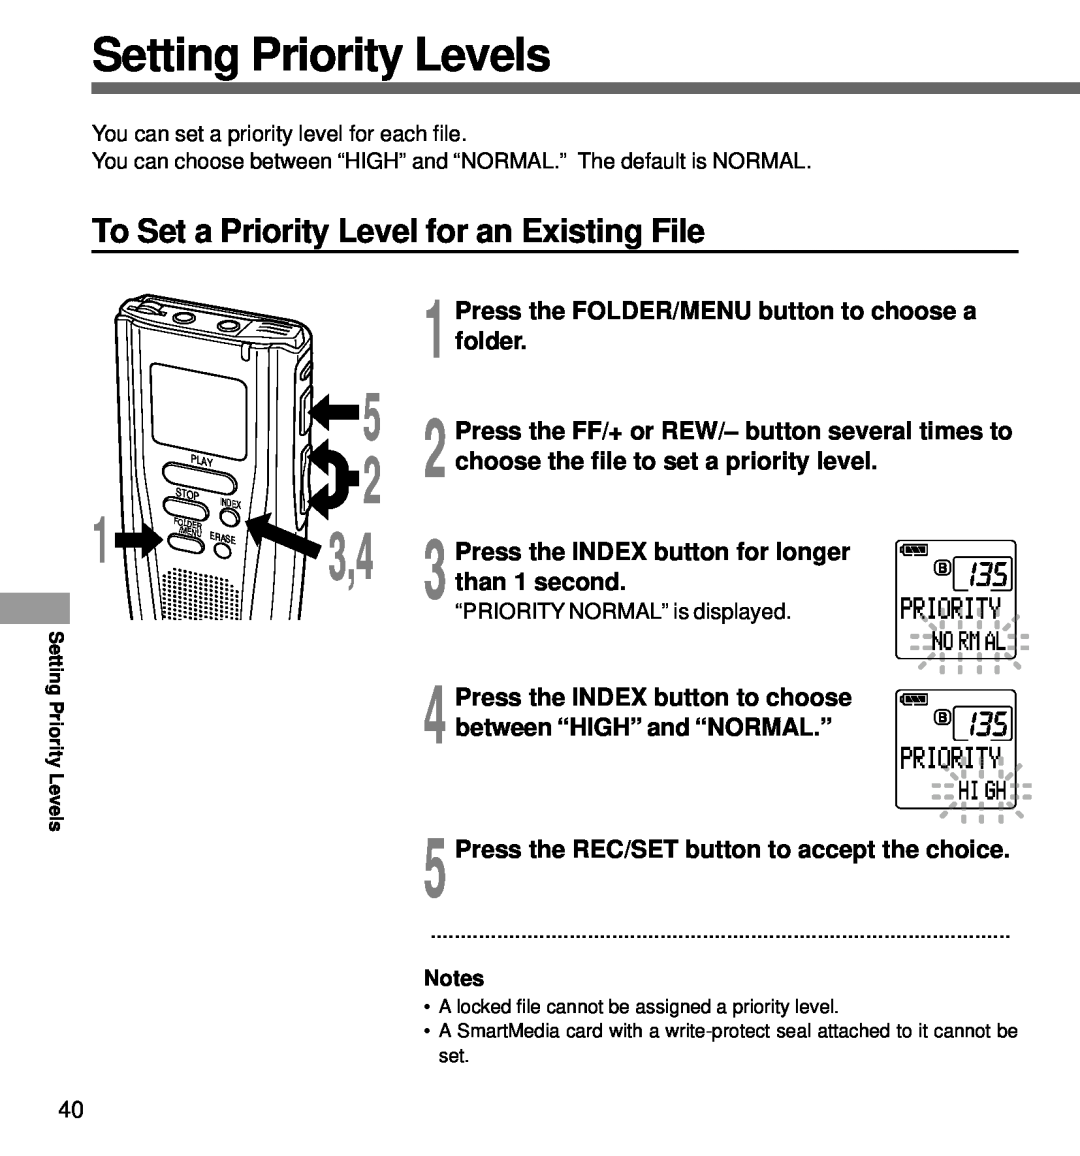 Olympus DS-3000 Setting Priority Levels, To Set a Priority Level for an Existing File, Play, Stop, Menu, Erase, Index 